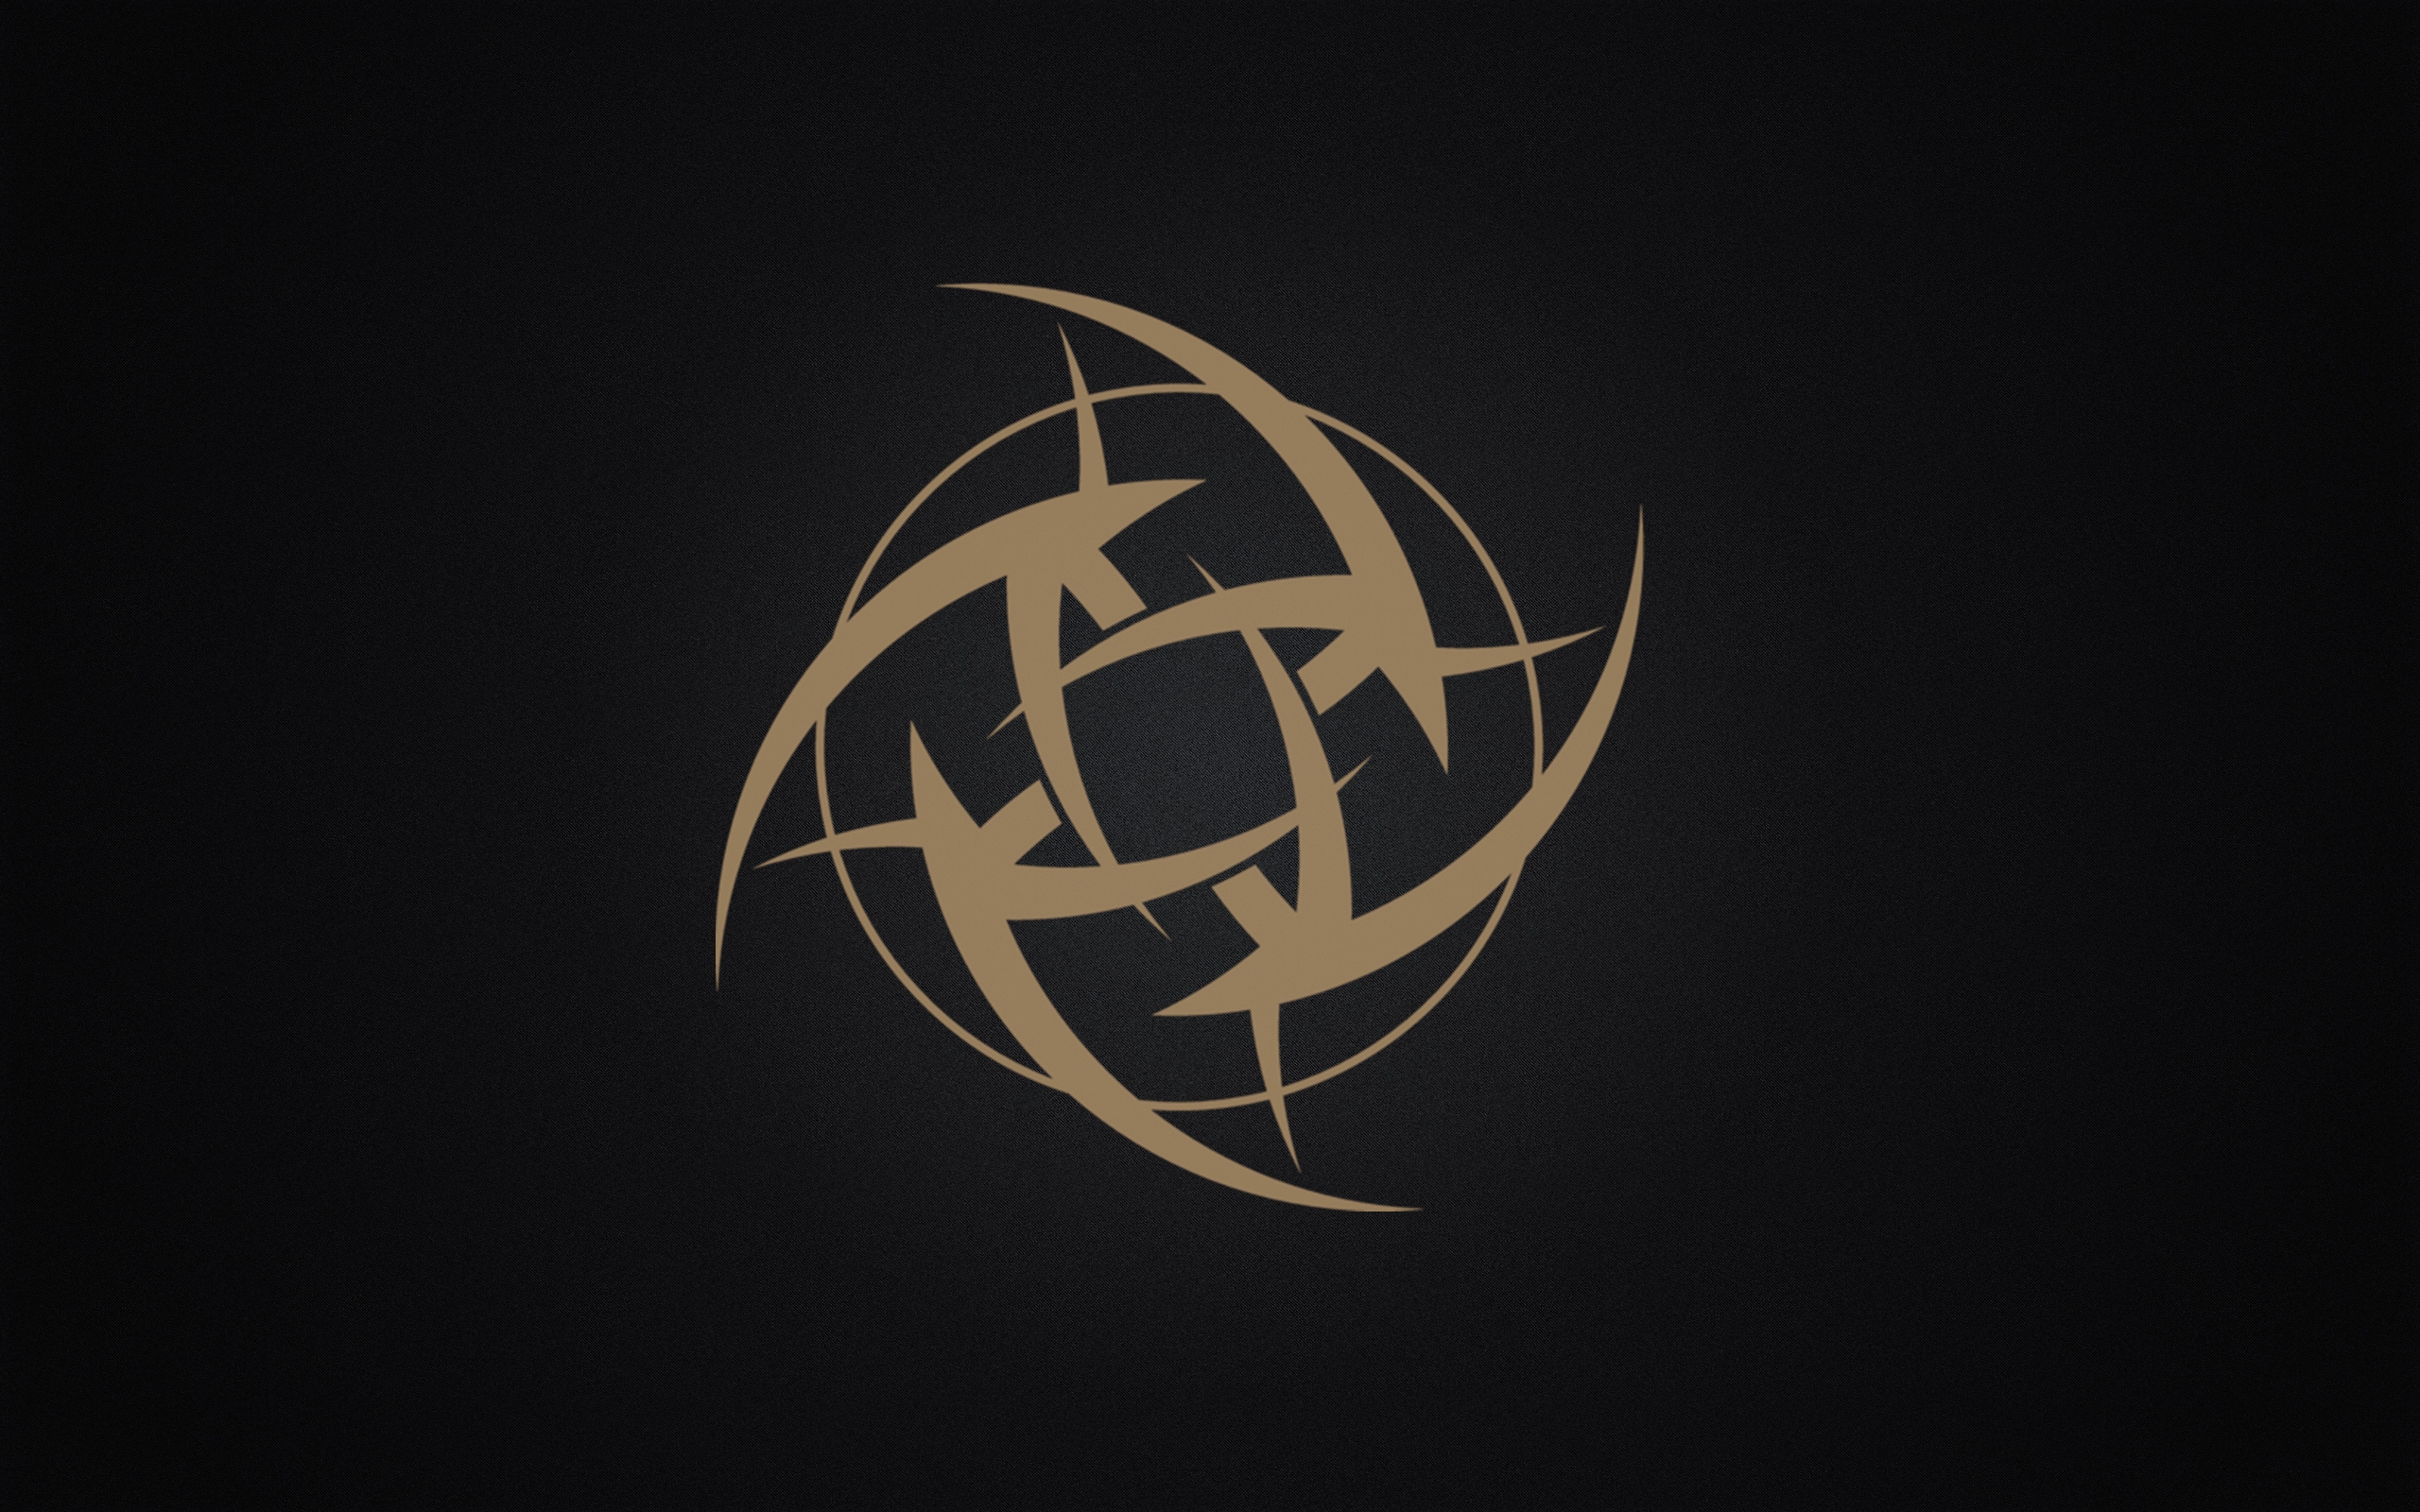 Nip by drx wallpaper created by drx | | CSGOWallpapers.com